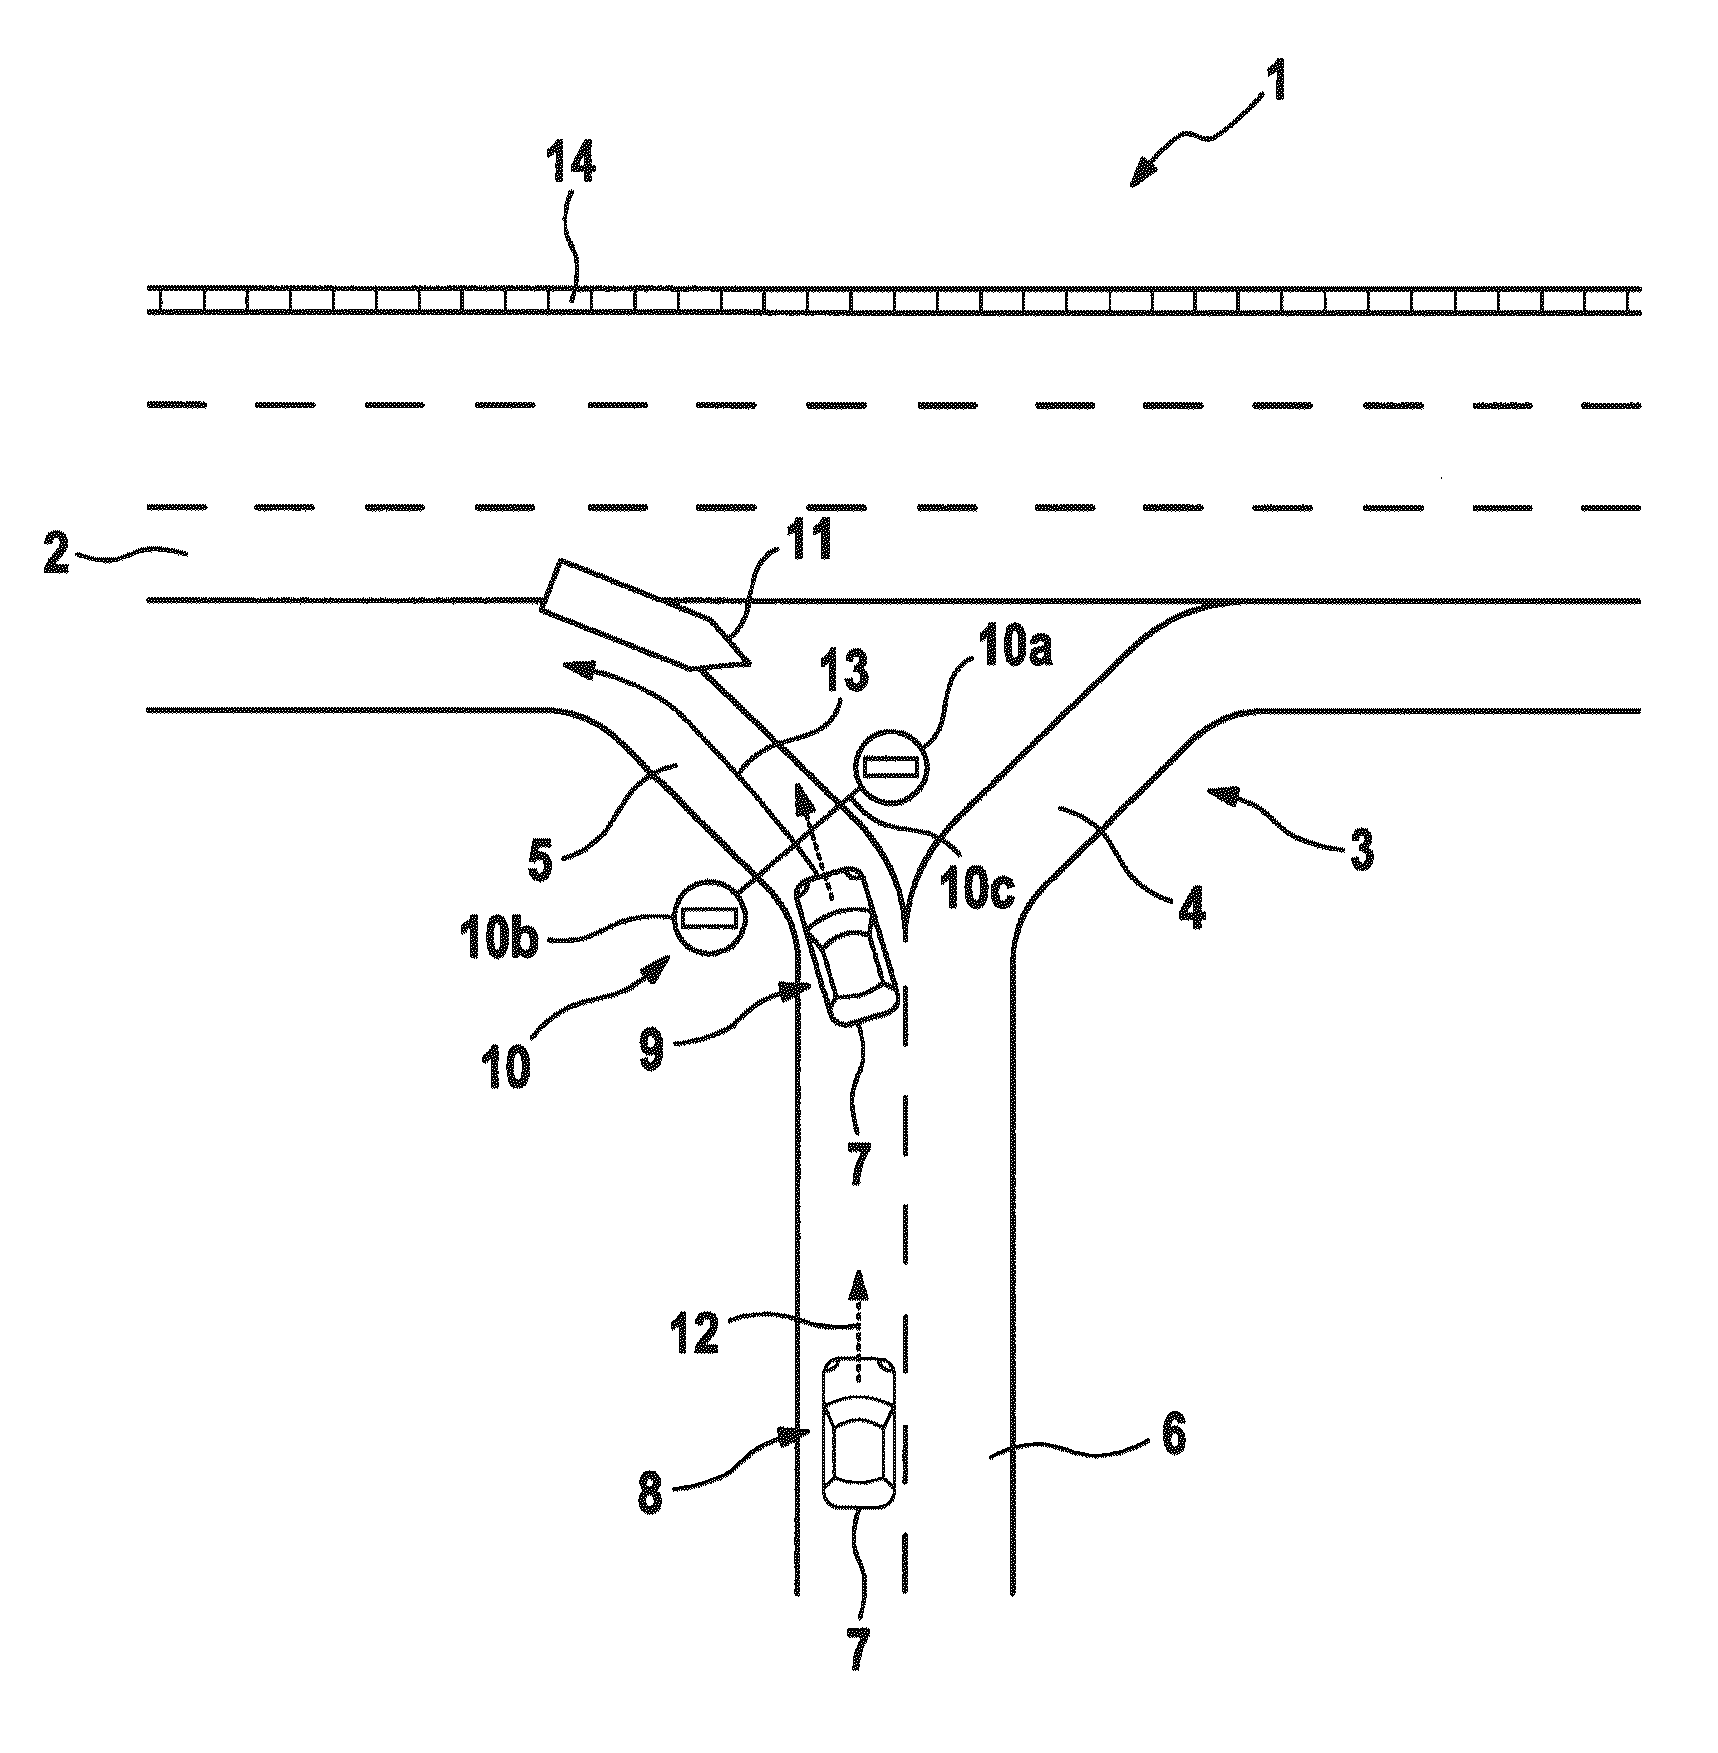 Method and control and detection device for a plausibility check of a wrong-way driving indcident of a motor vehicle